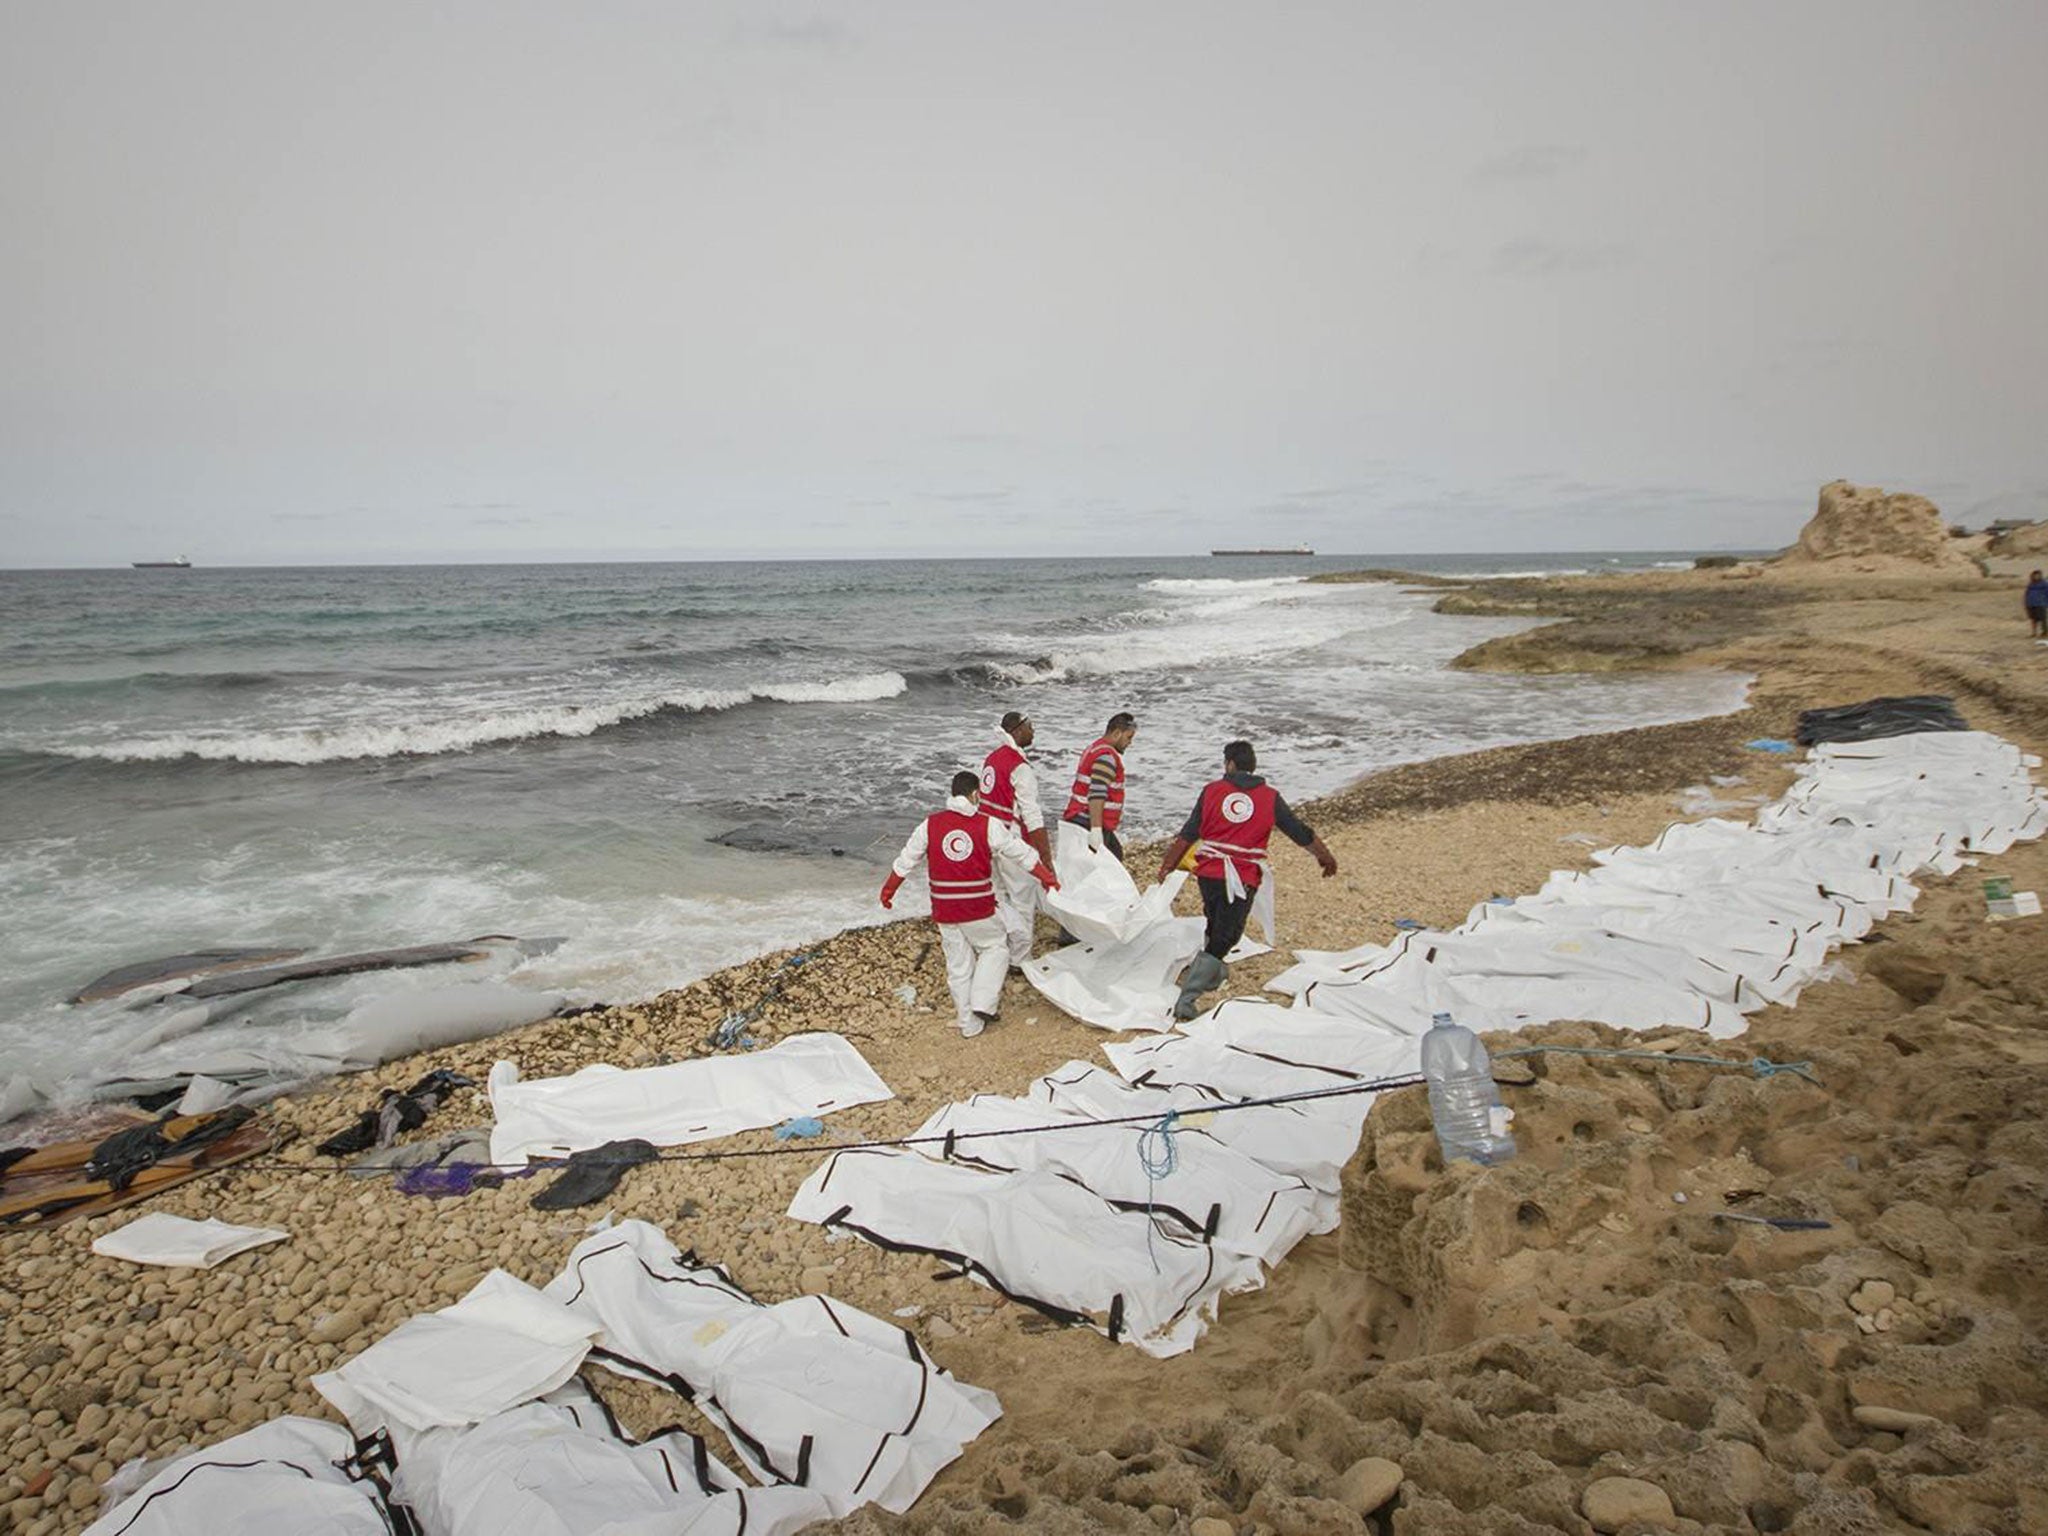 The bodies of 74 migrants washed ashore near the city of Zawiyah, a hub for smugglers launching boats towards Europe